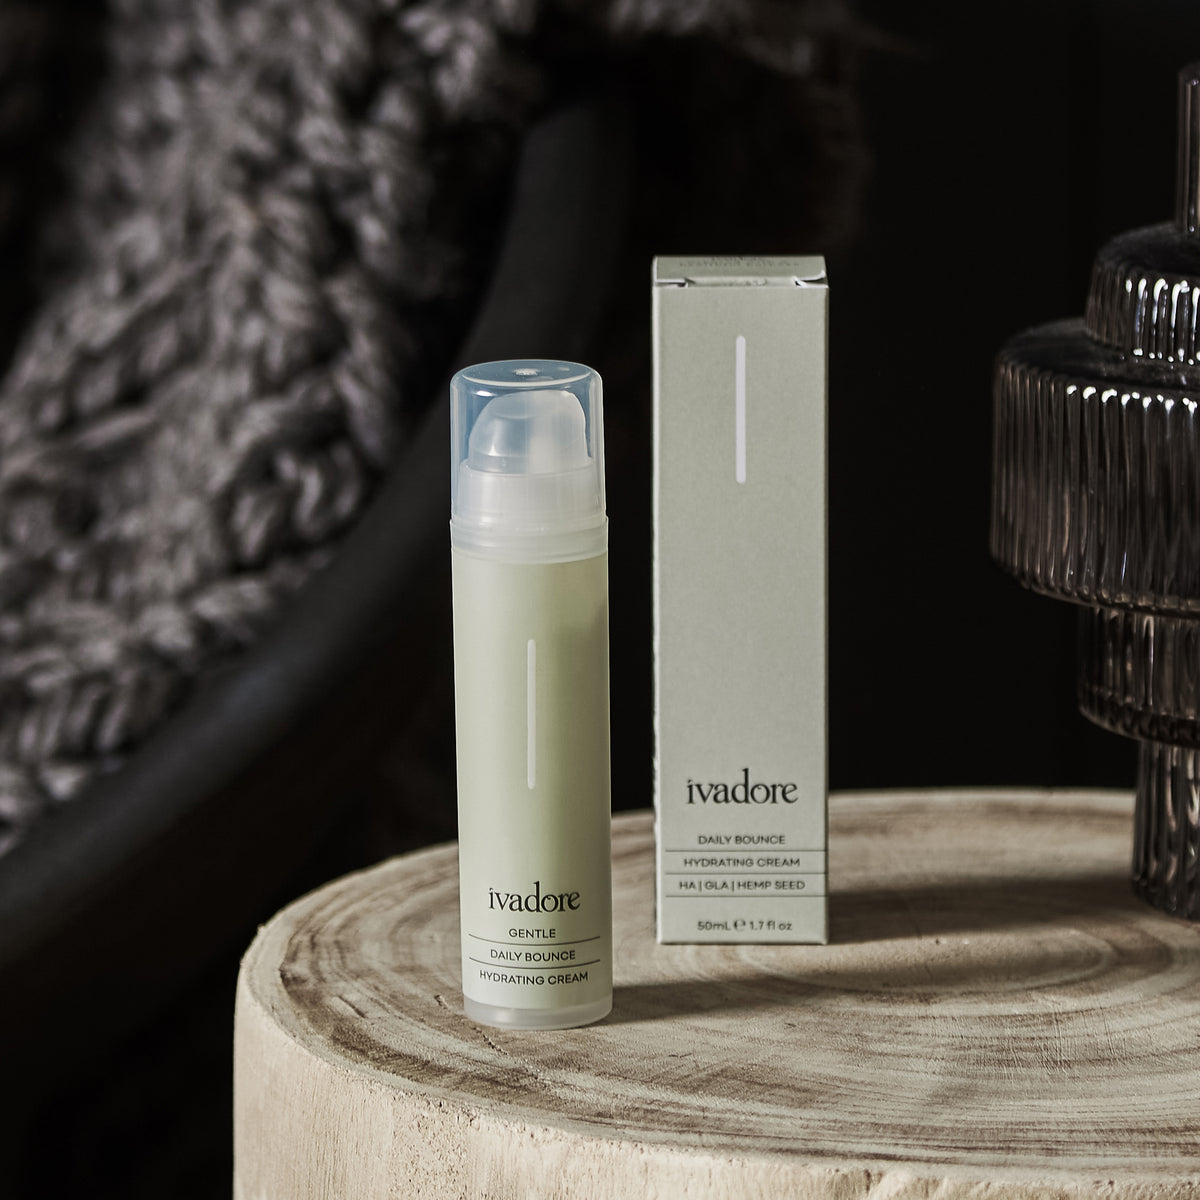 Daily Bounce Hydrating Cream in packaging on wooden table with grey glass vase